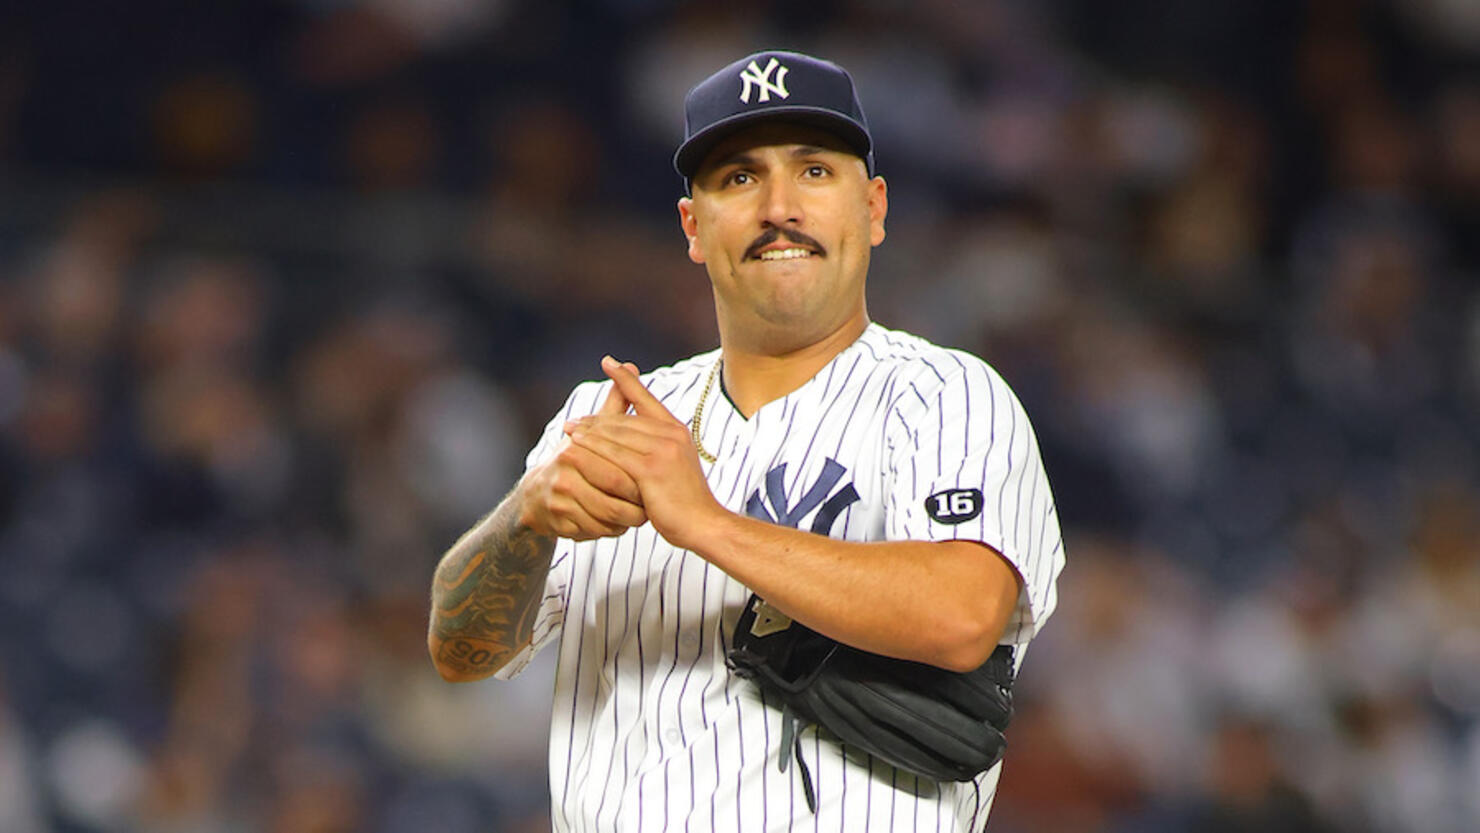 Yankees Ace Nestor Cortes Proposes To GF After All-Star Game, She Says Yes!